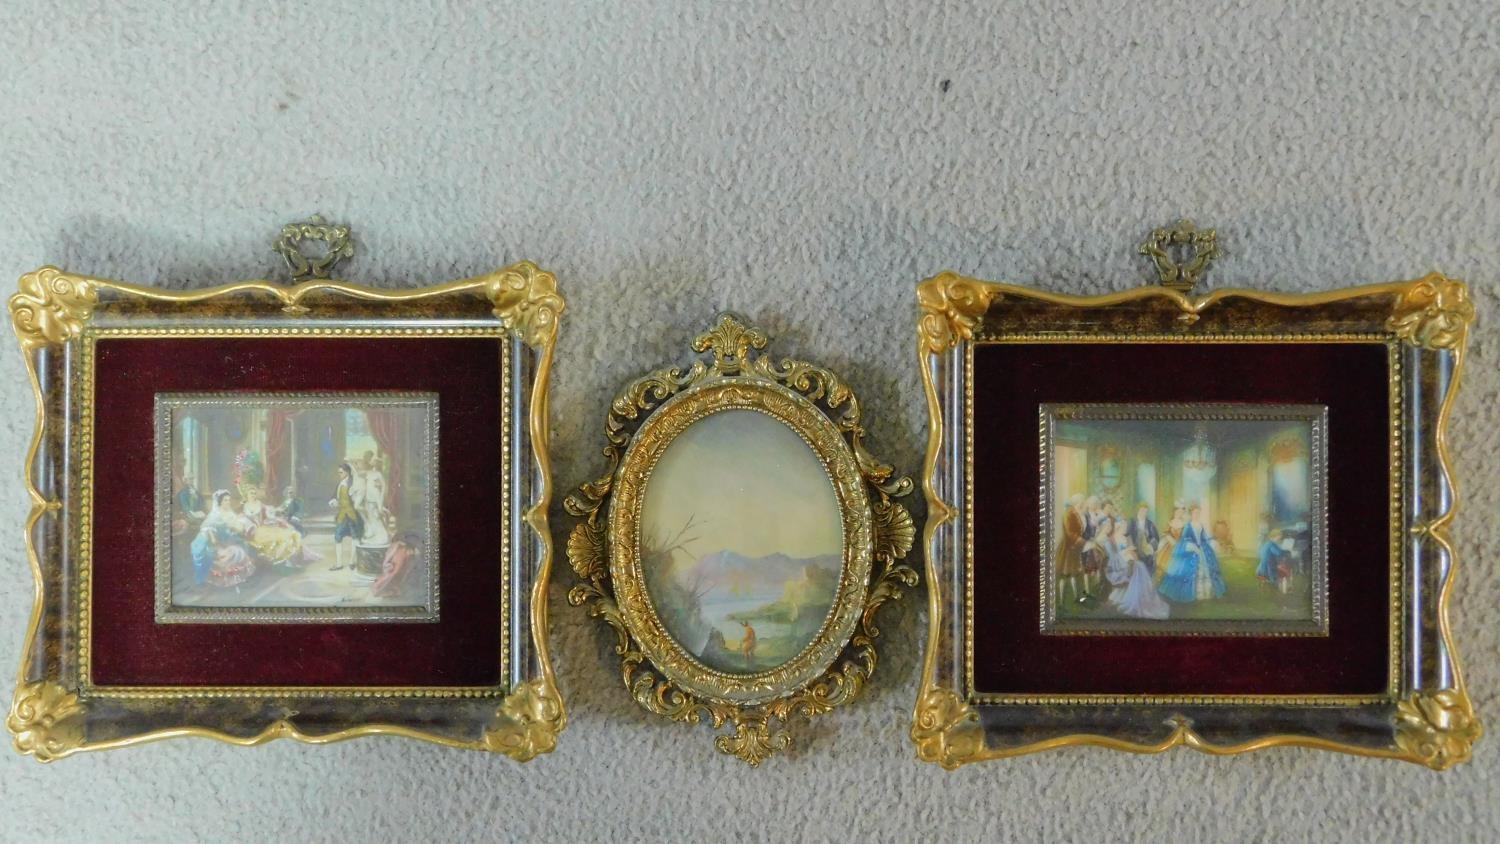 A pair of miniature prints, interior scenes and an oval landscape scene, all in decorative gilt